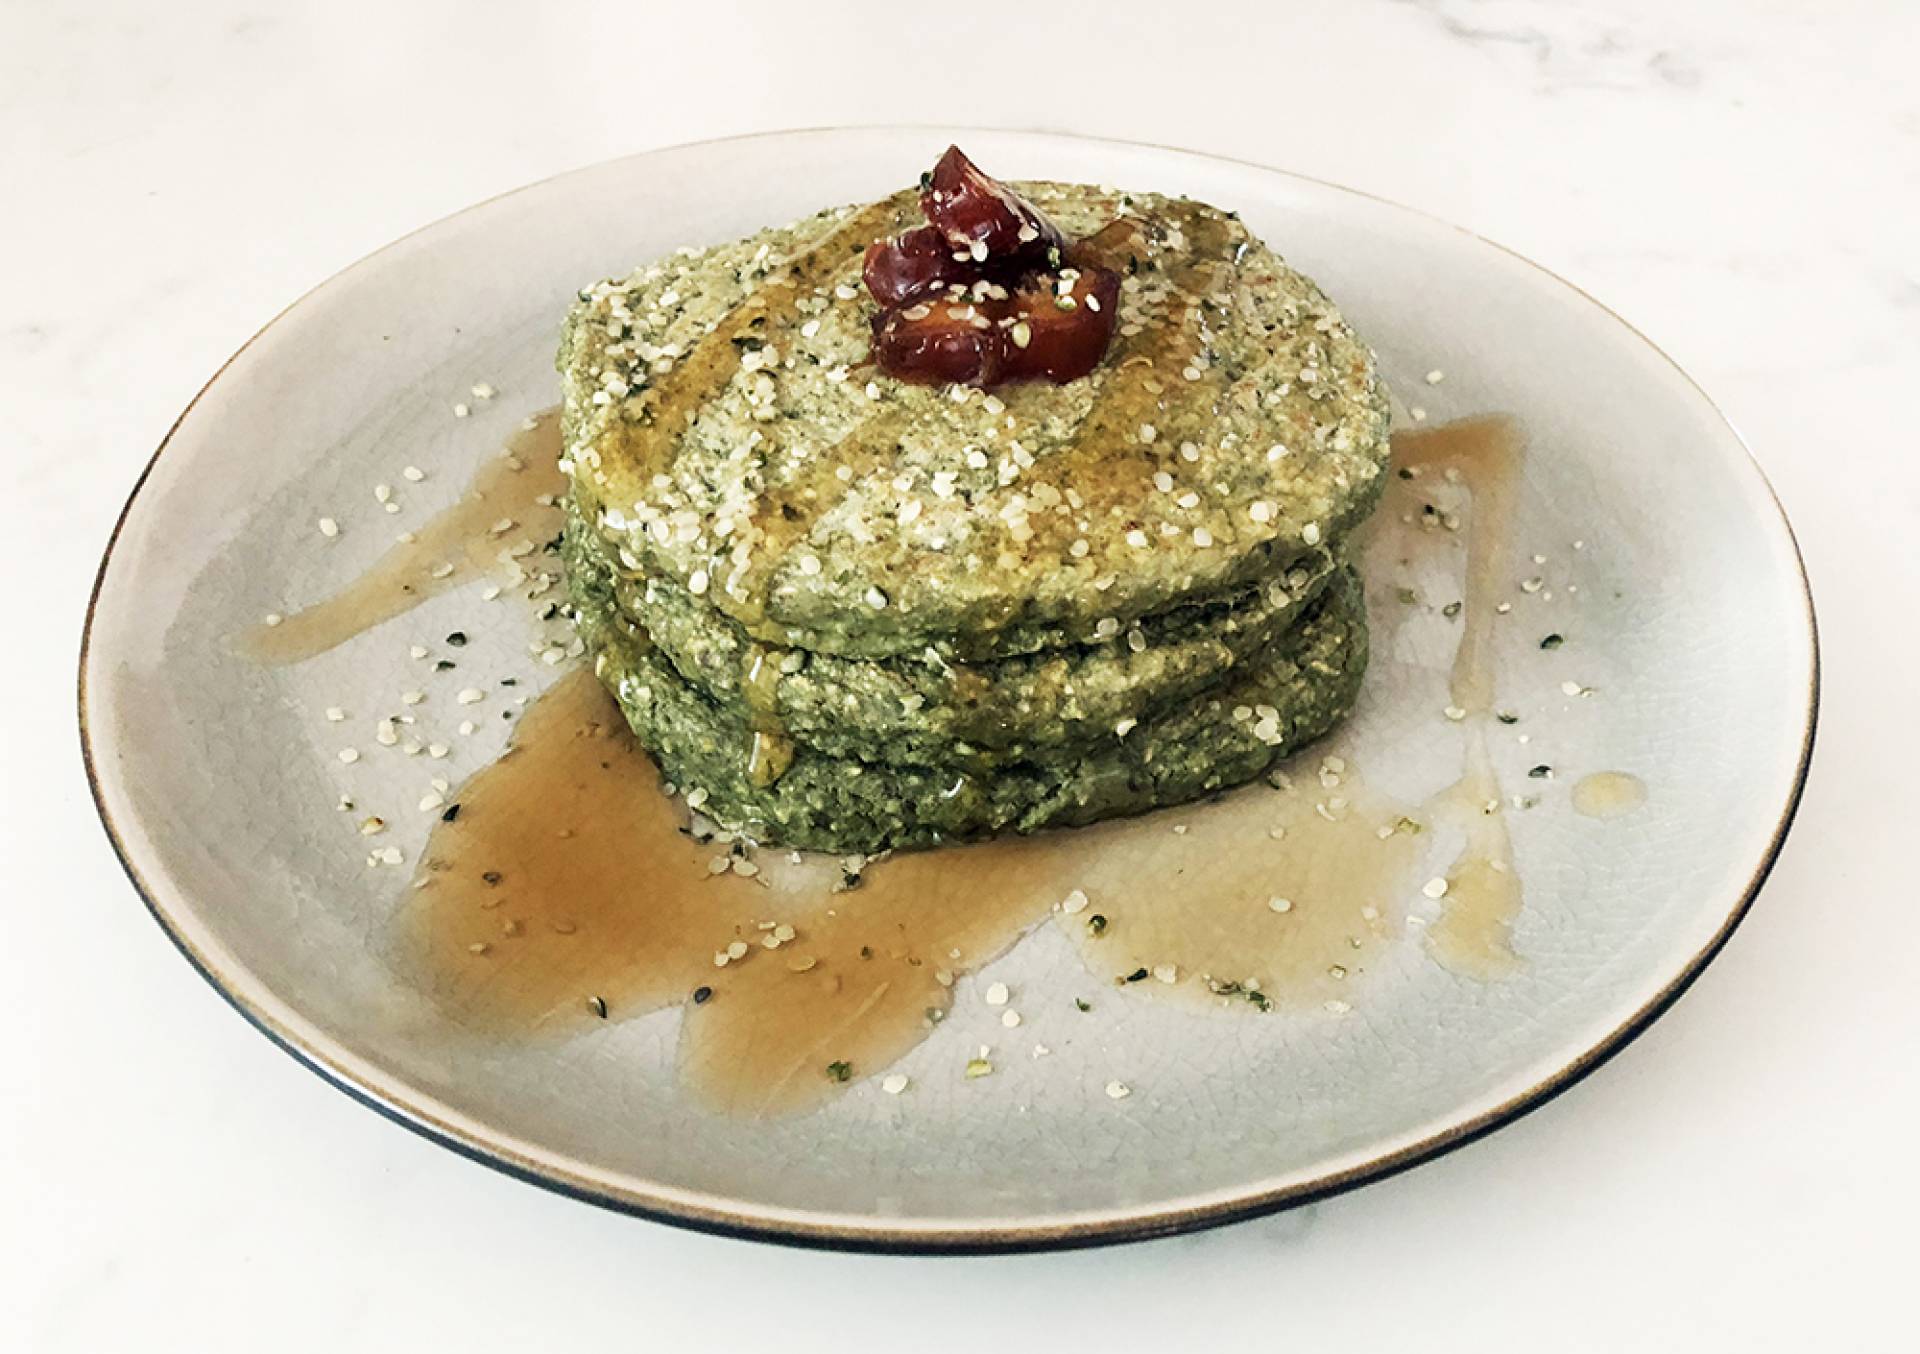 Green power pancakes + maple syrup y frutas (V)